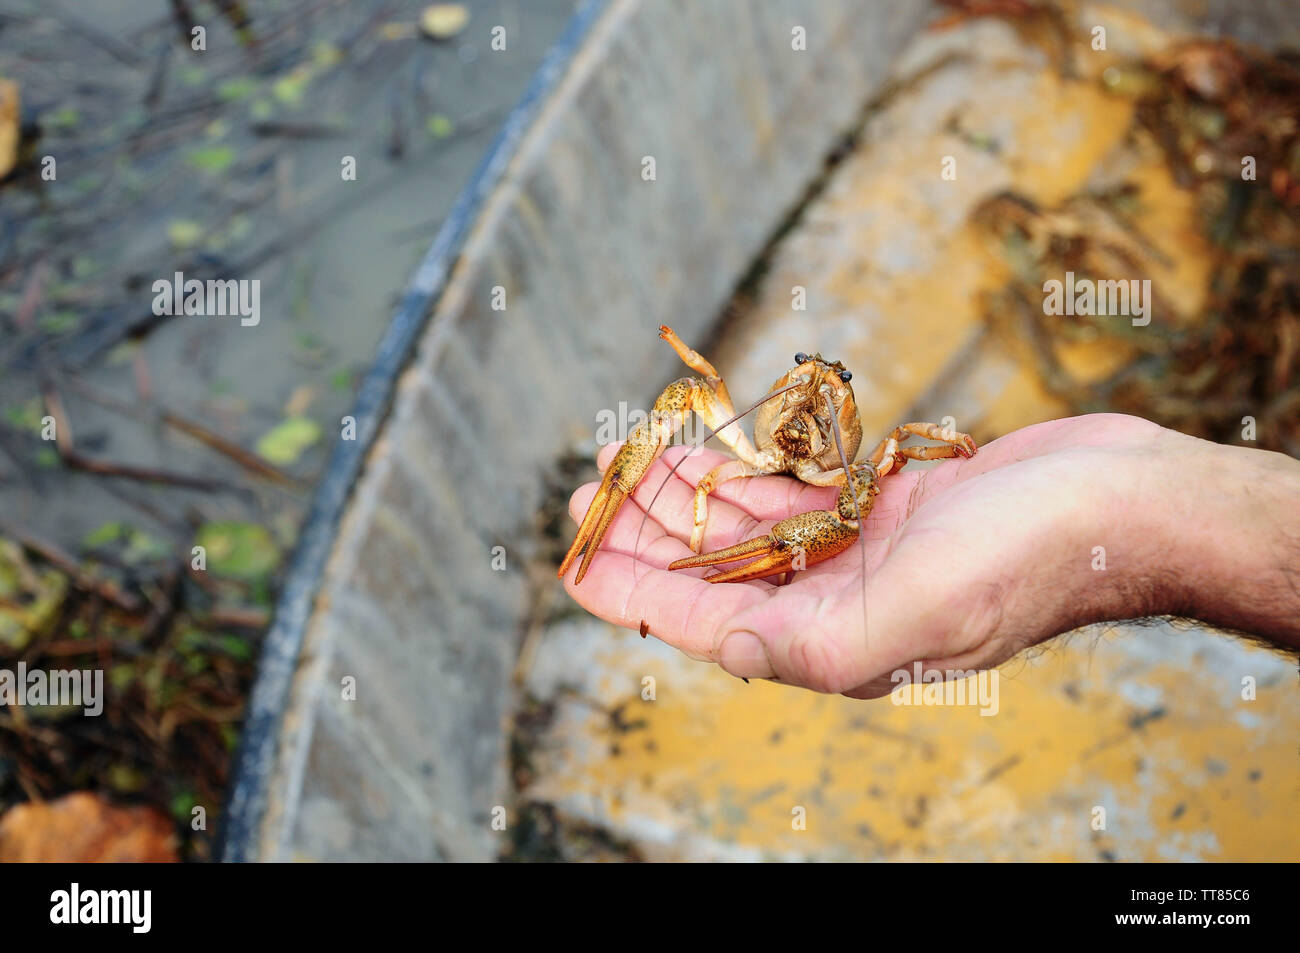 Closeup of male hand holding an alive freshwater crayfish Stock Photo